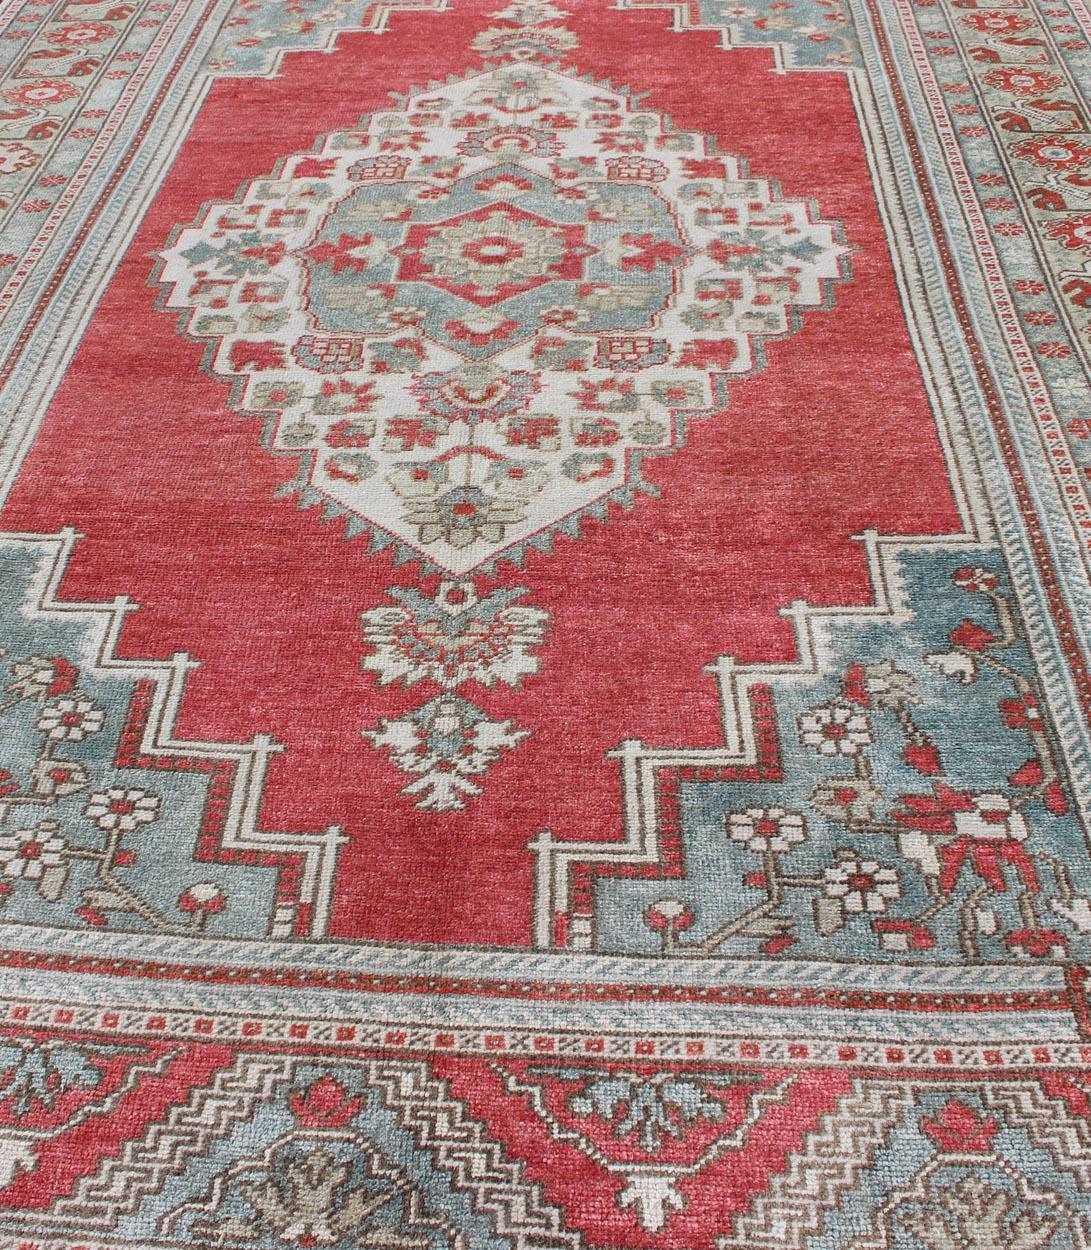 Vintage Turkish Oushak Rug with Medallion Design in Pink Red and Gray Blue In Good Condition For Sale In Atlanta, GA